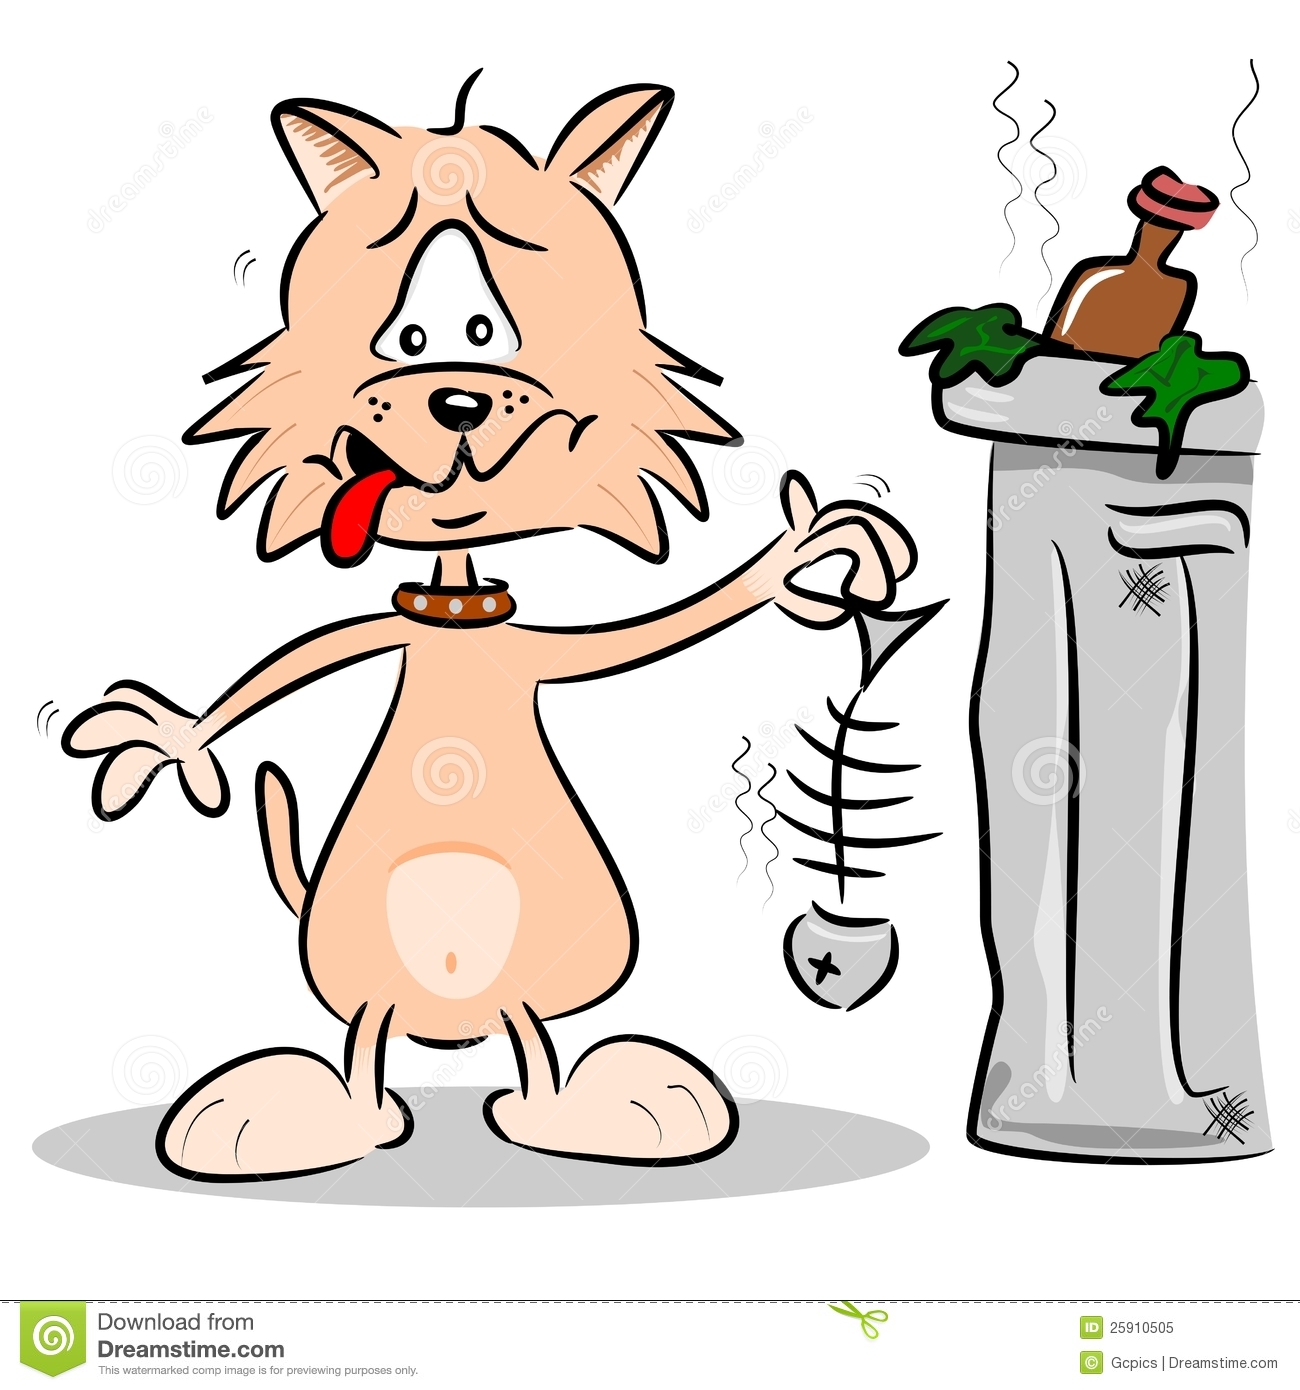 Stinky Trash Clipart Displaying 20 Images For Stinky Trash Clipart